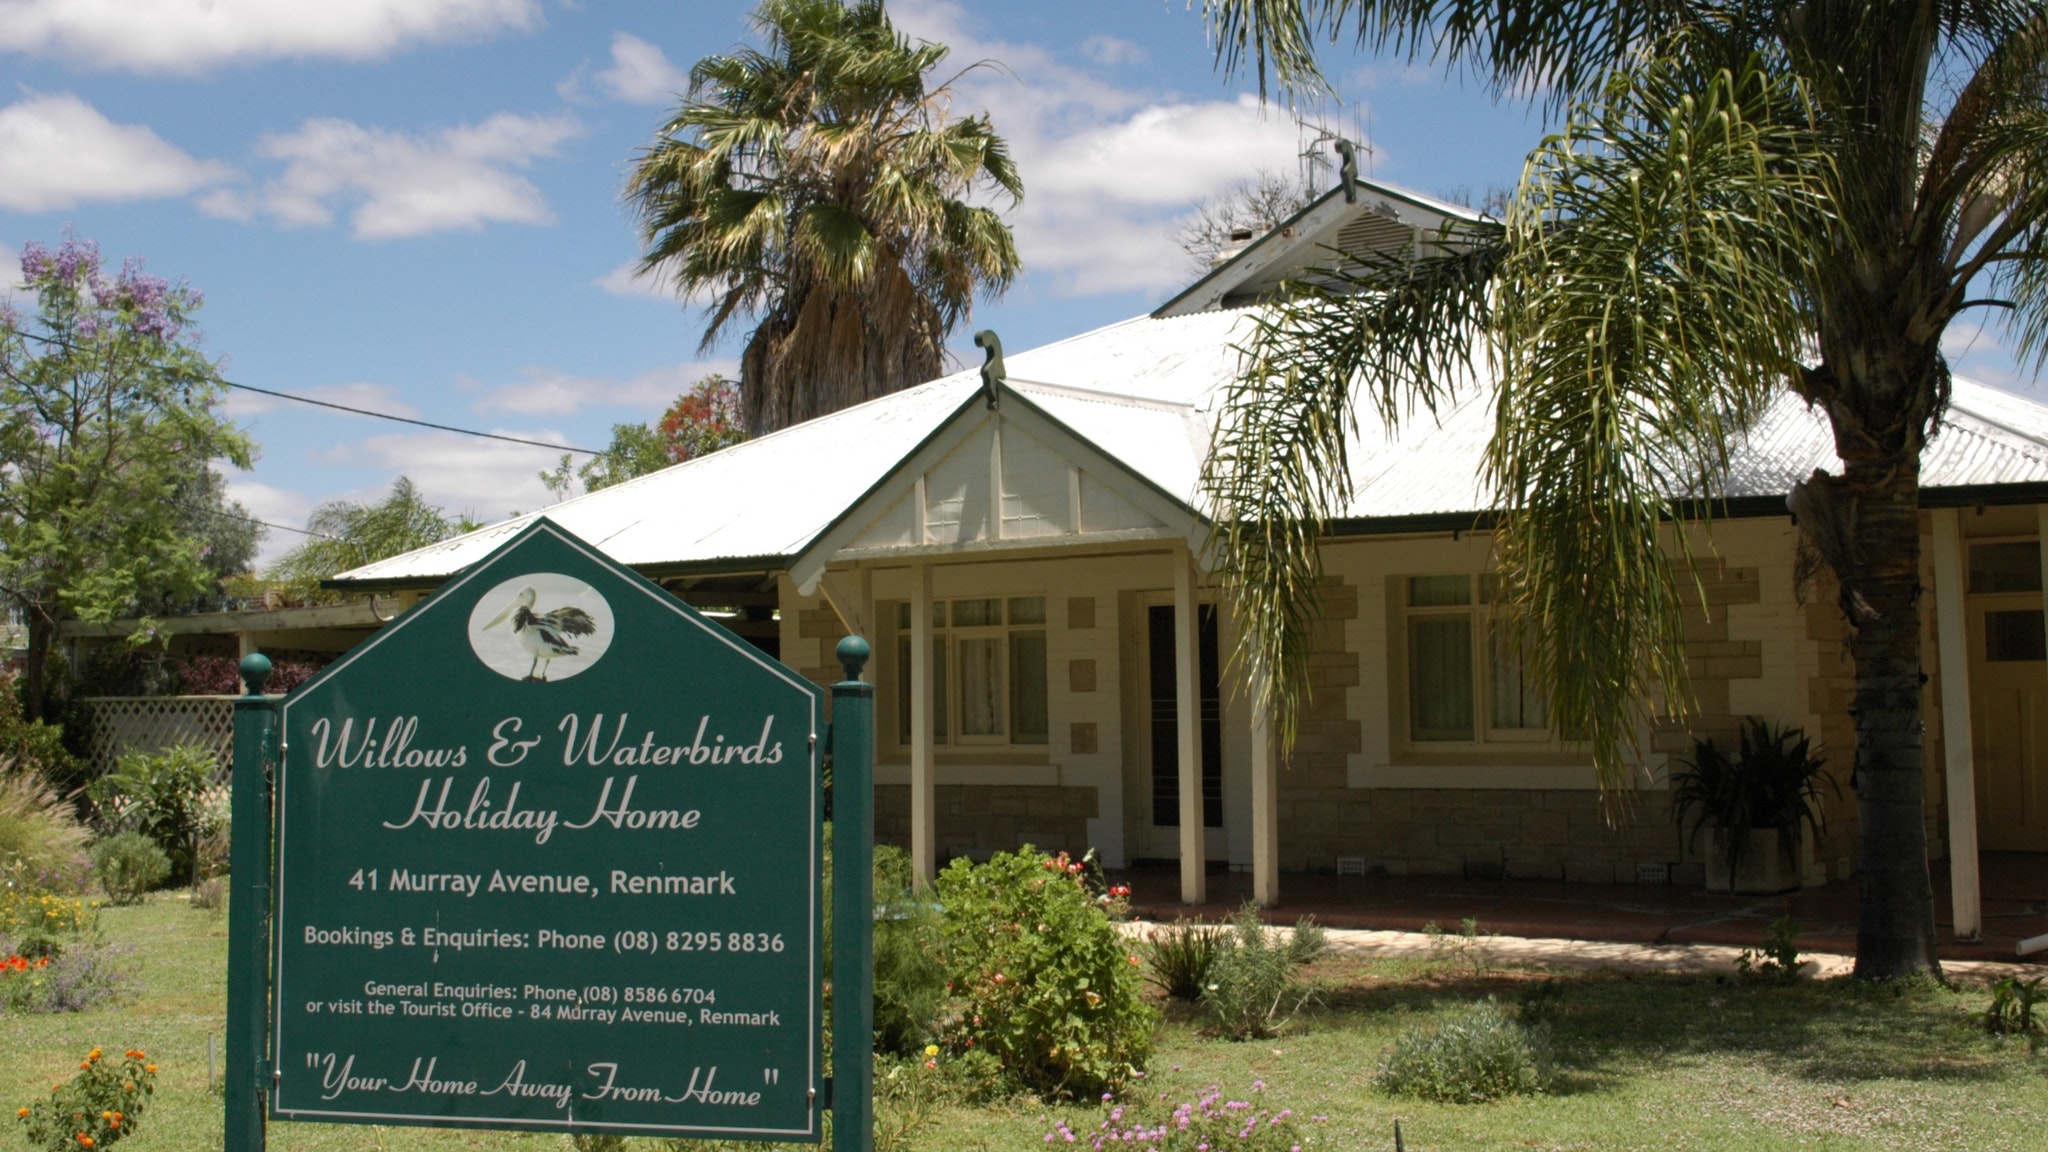 Renmark Holiday Home Willows  Waterbirds - Accommodation NSW